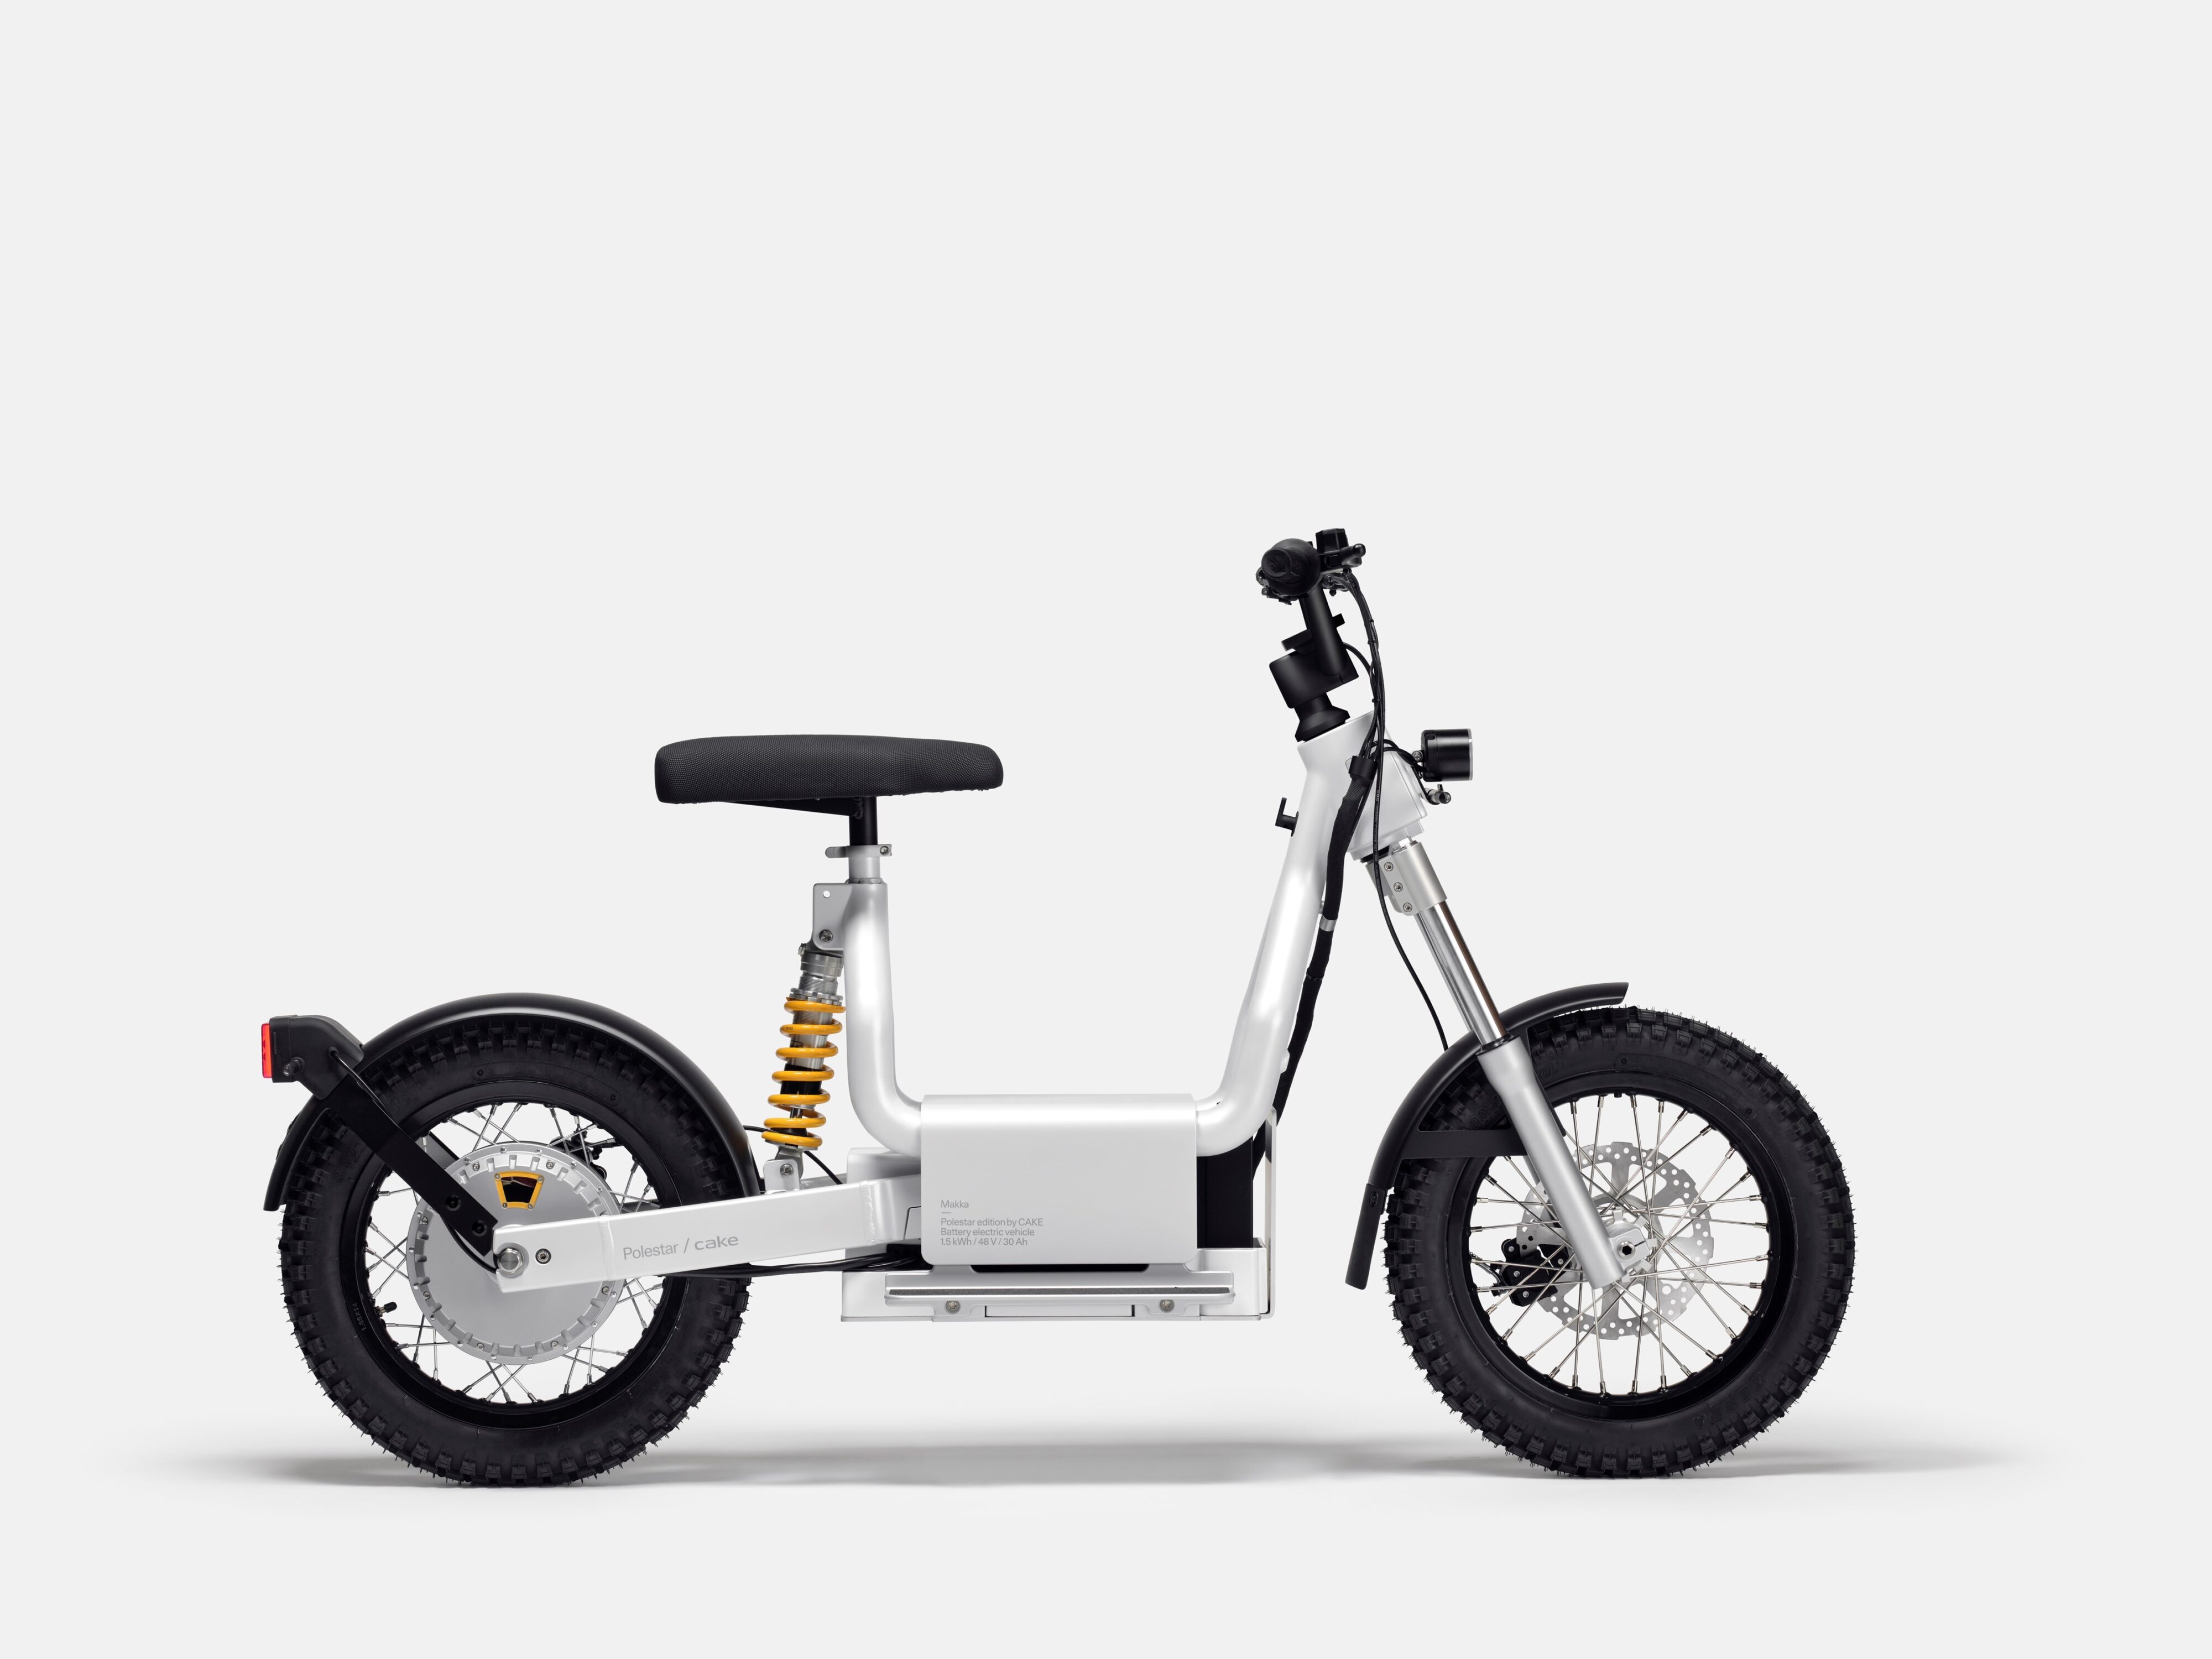 Side view of the original CAKE Makka Polestar edition electric moped in white